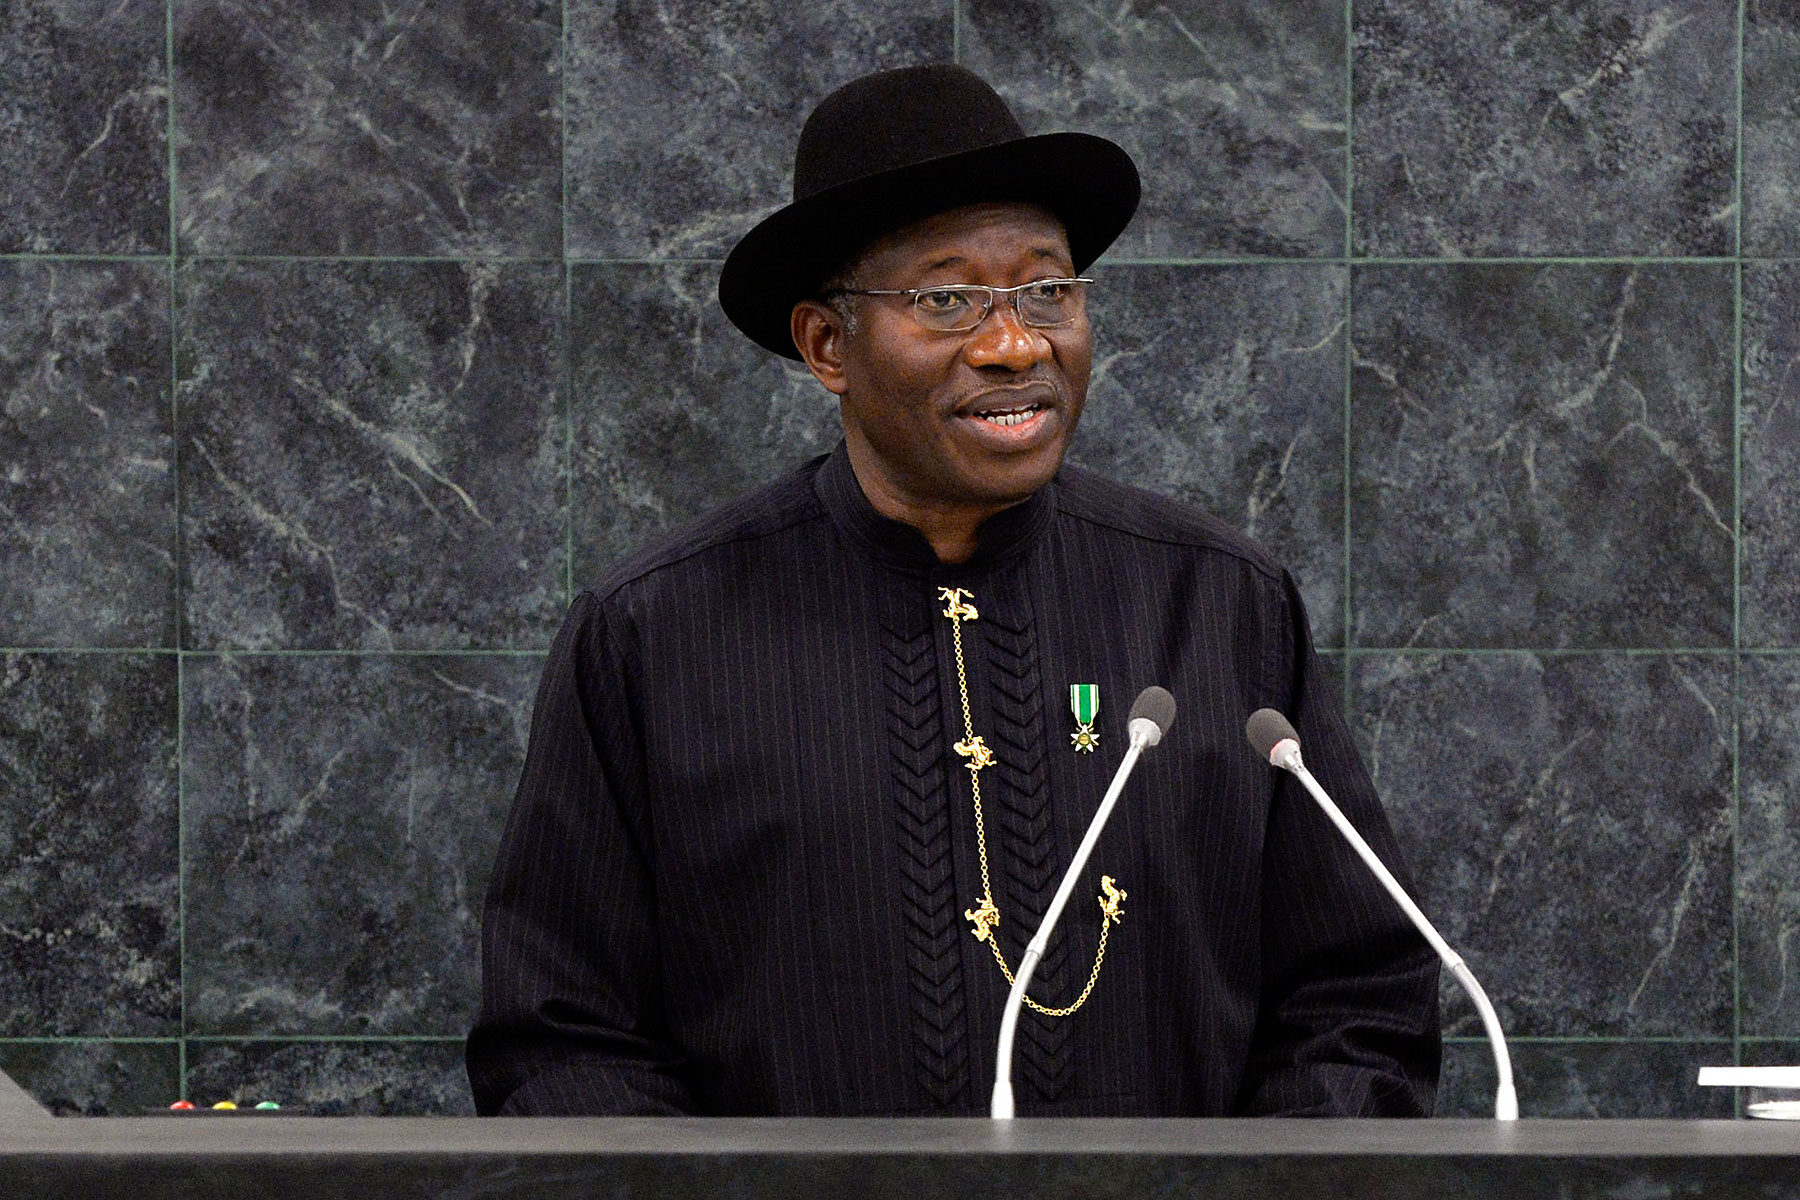 Nigerian President Goodluck Jonathan speaks at the 68th United Nations General Assembly on Sept. 24, 2013 in New York City (Andrew Burton—Getty Images)